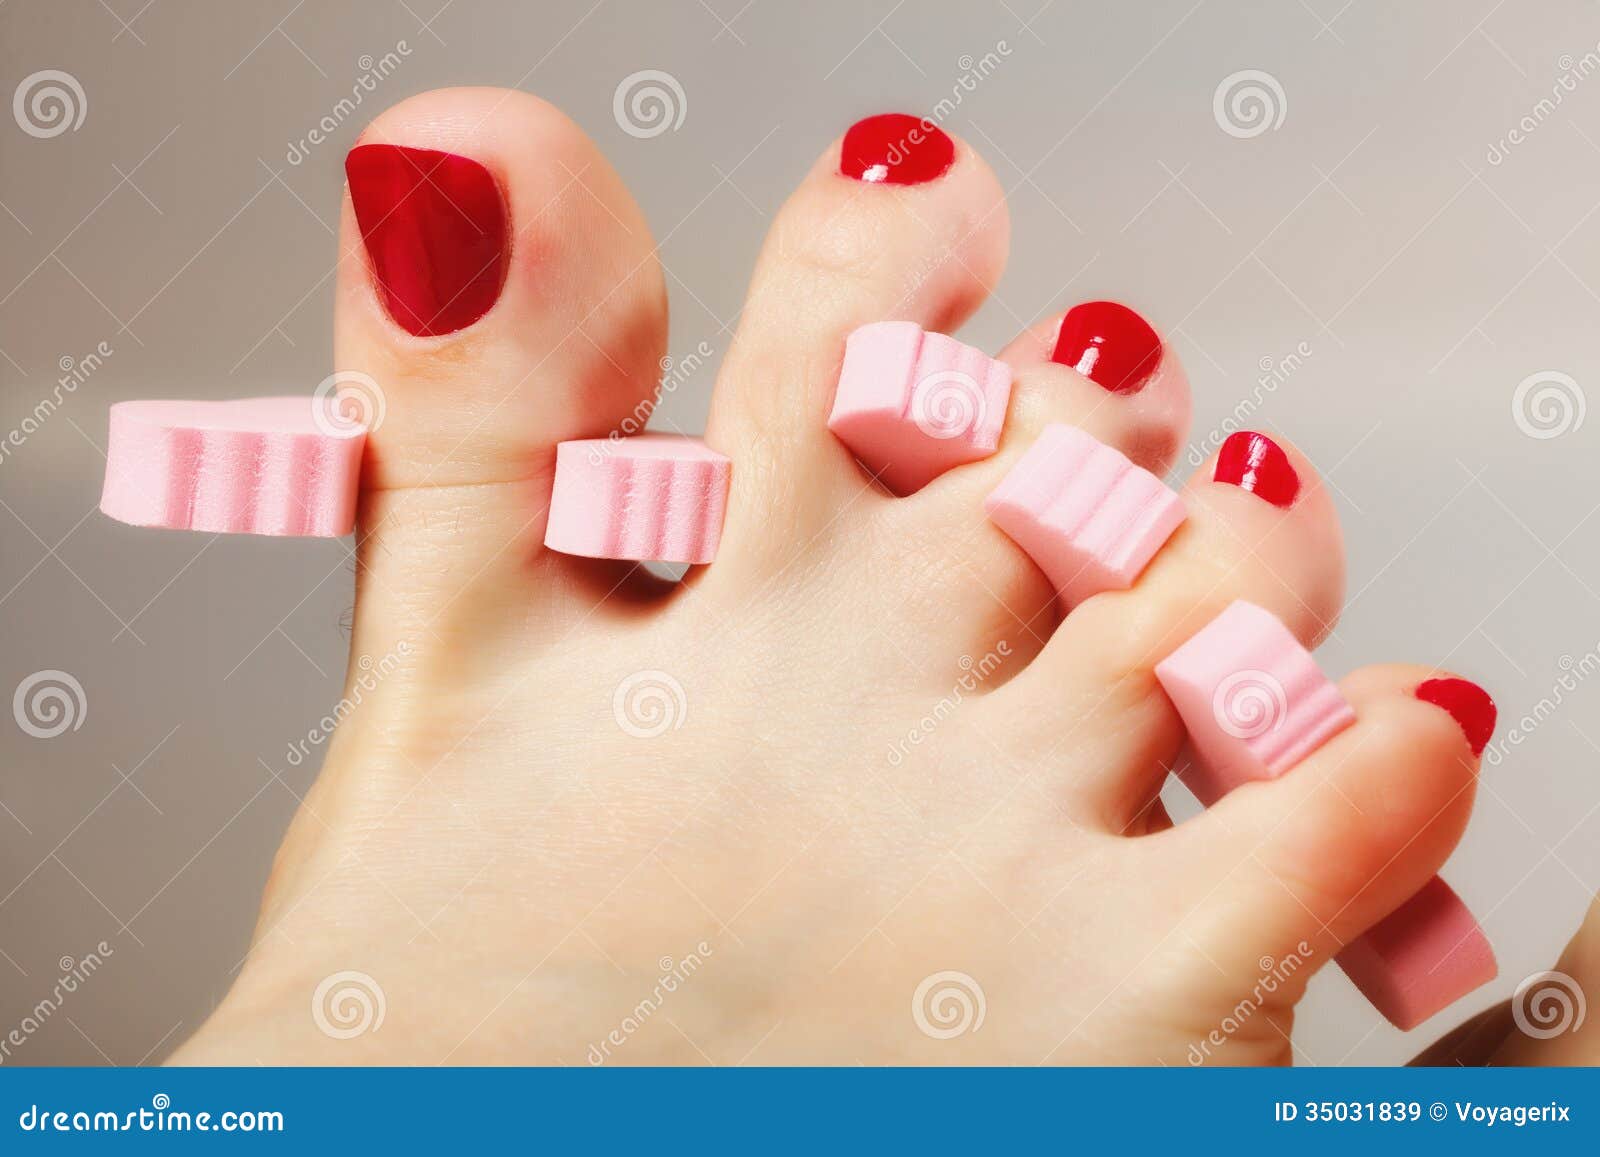 Foot Pedicure Applying Red Toenails Stock Image - Image of body, paint ...